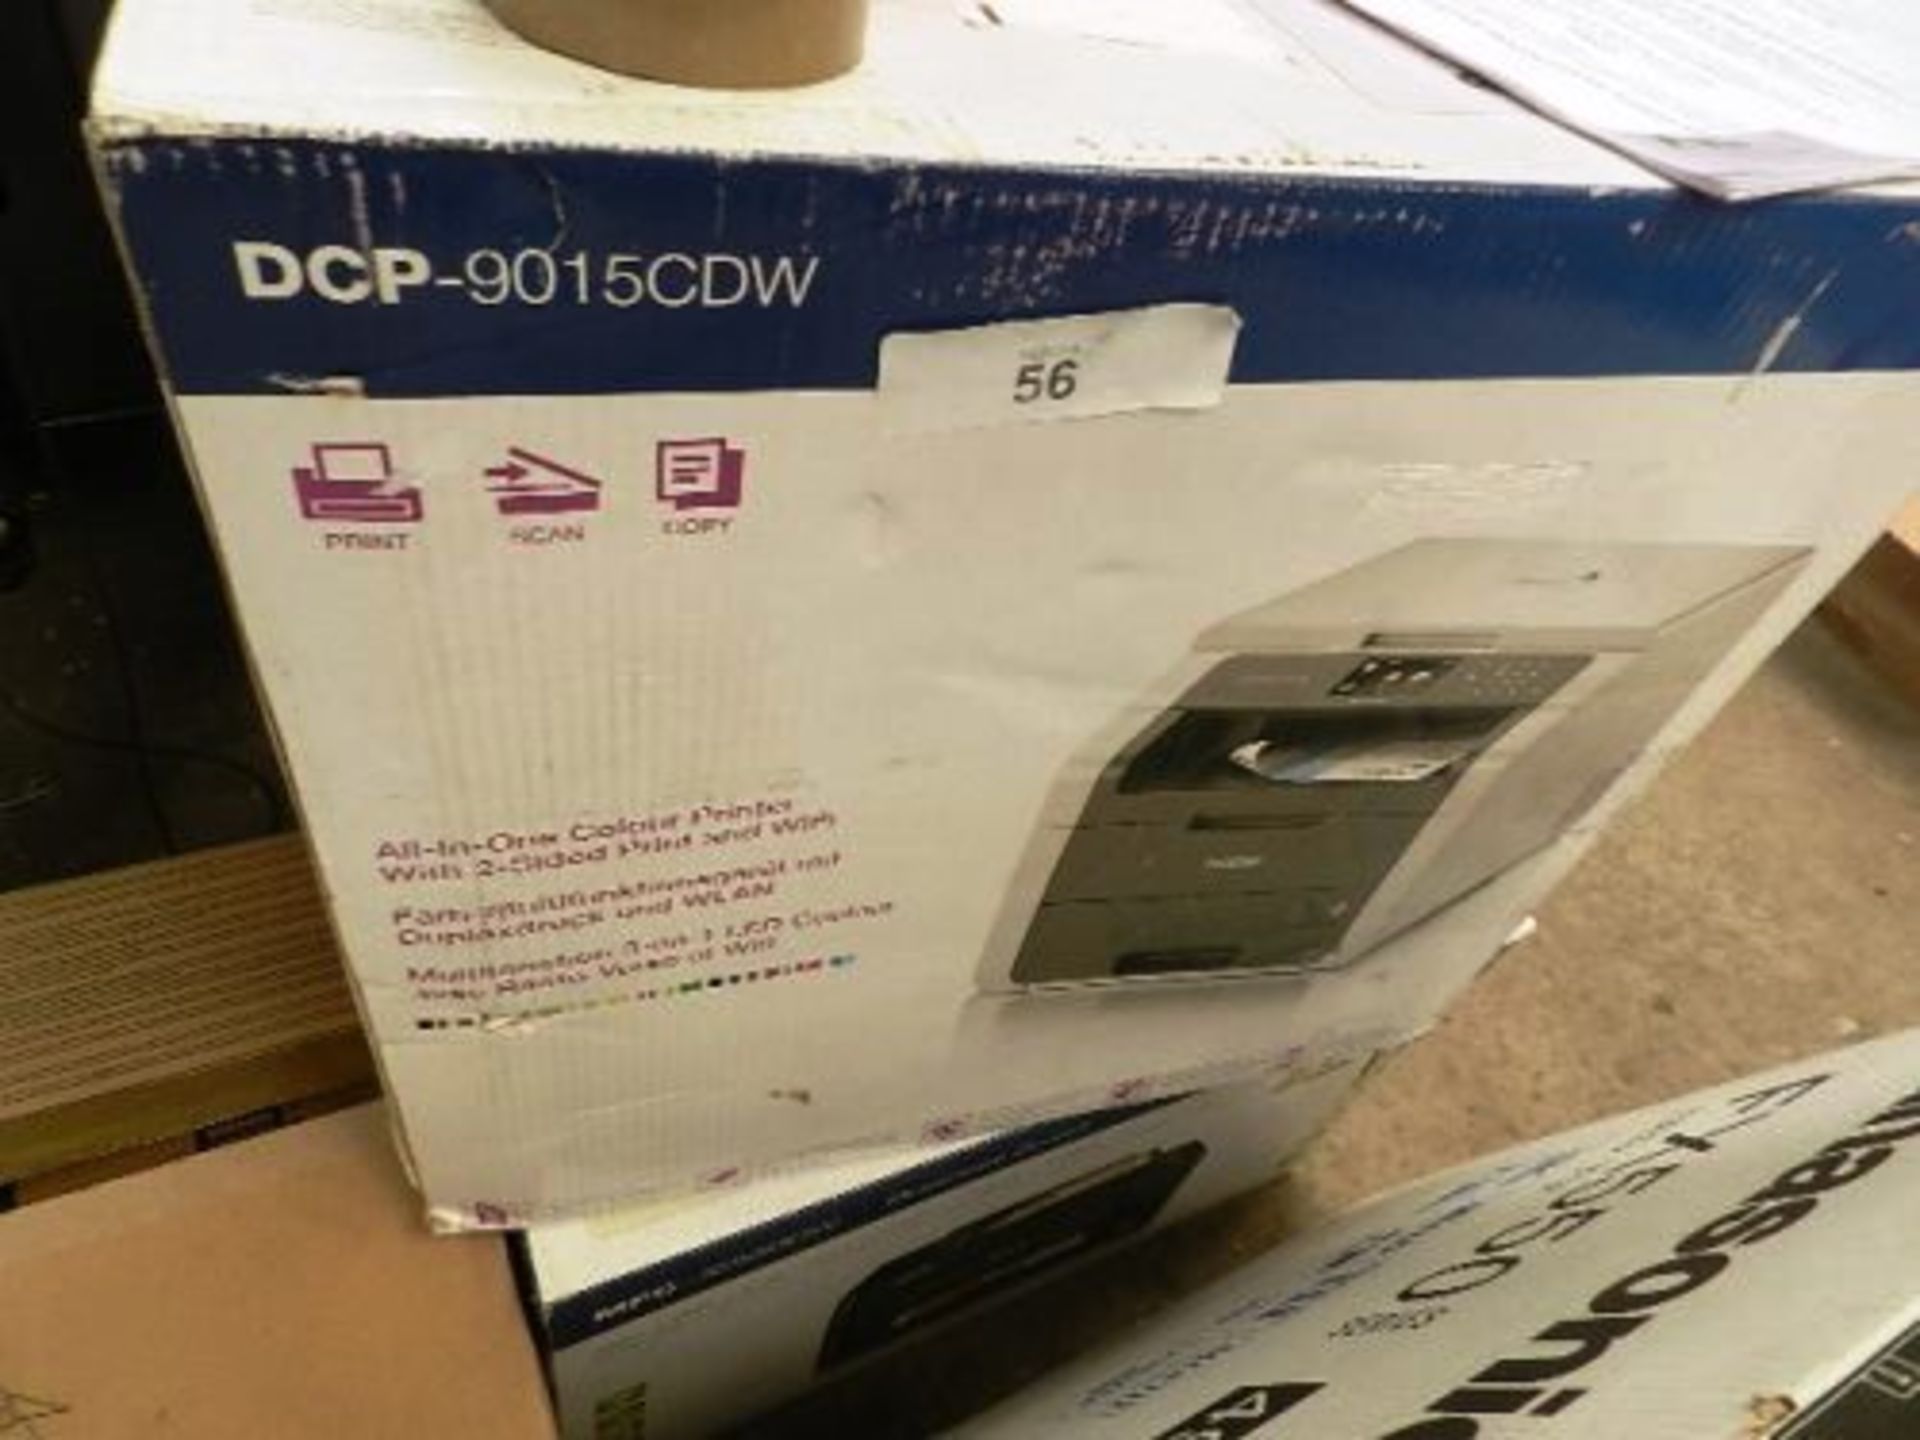 1 x Brother DCP9015CDW all-in-one colour printer - Sealed new in box (esb4)